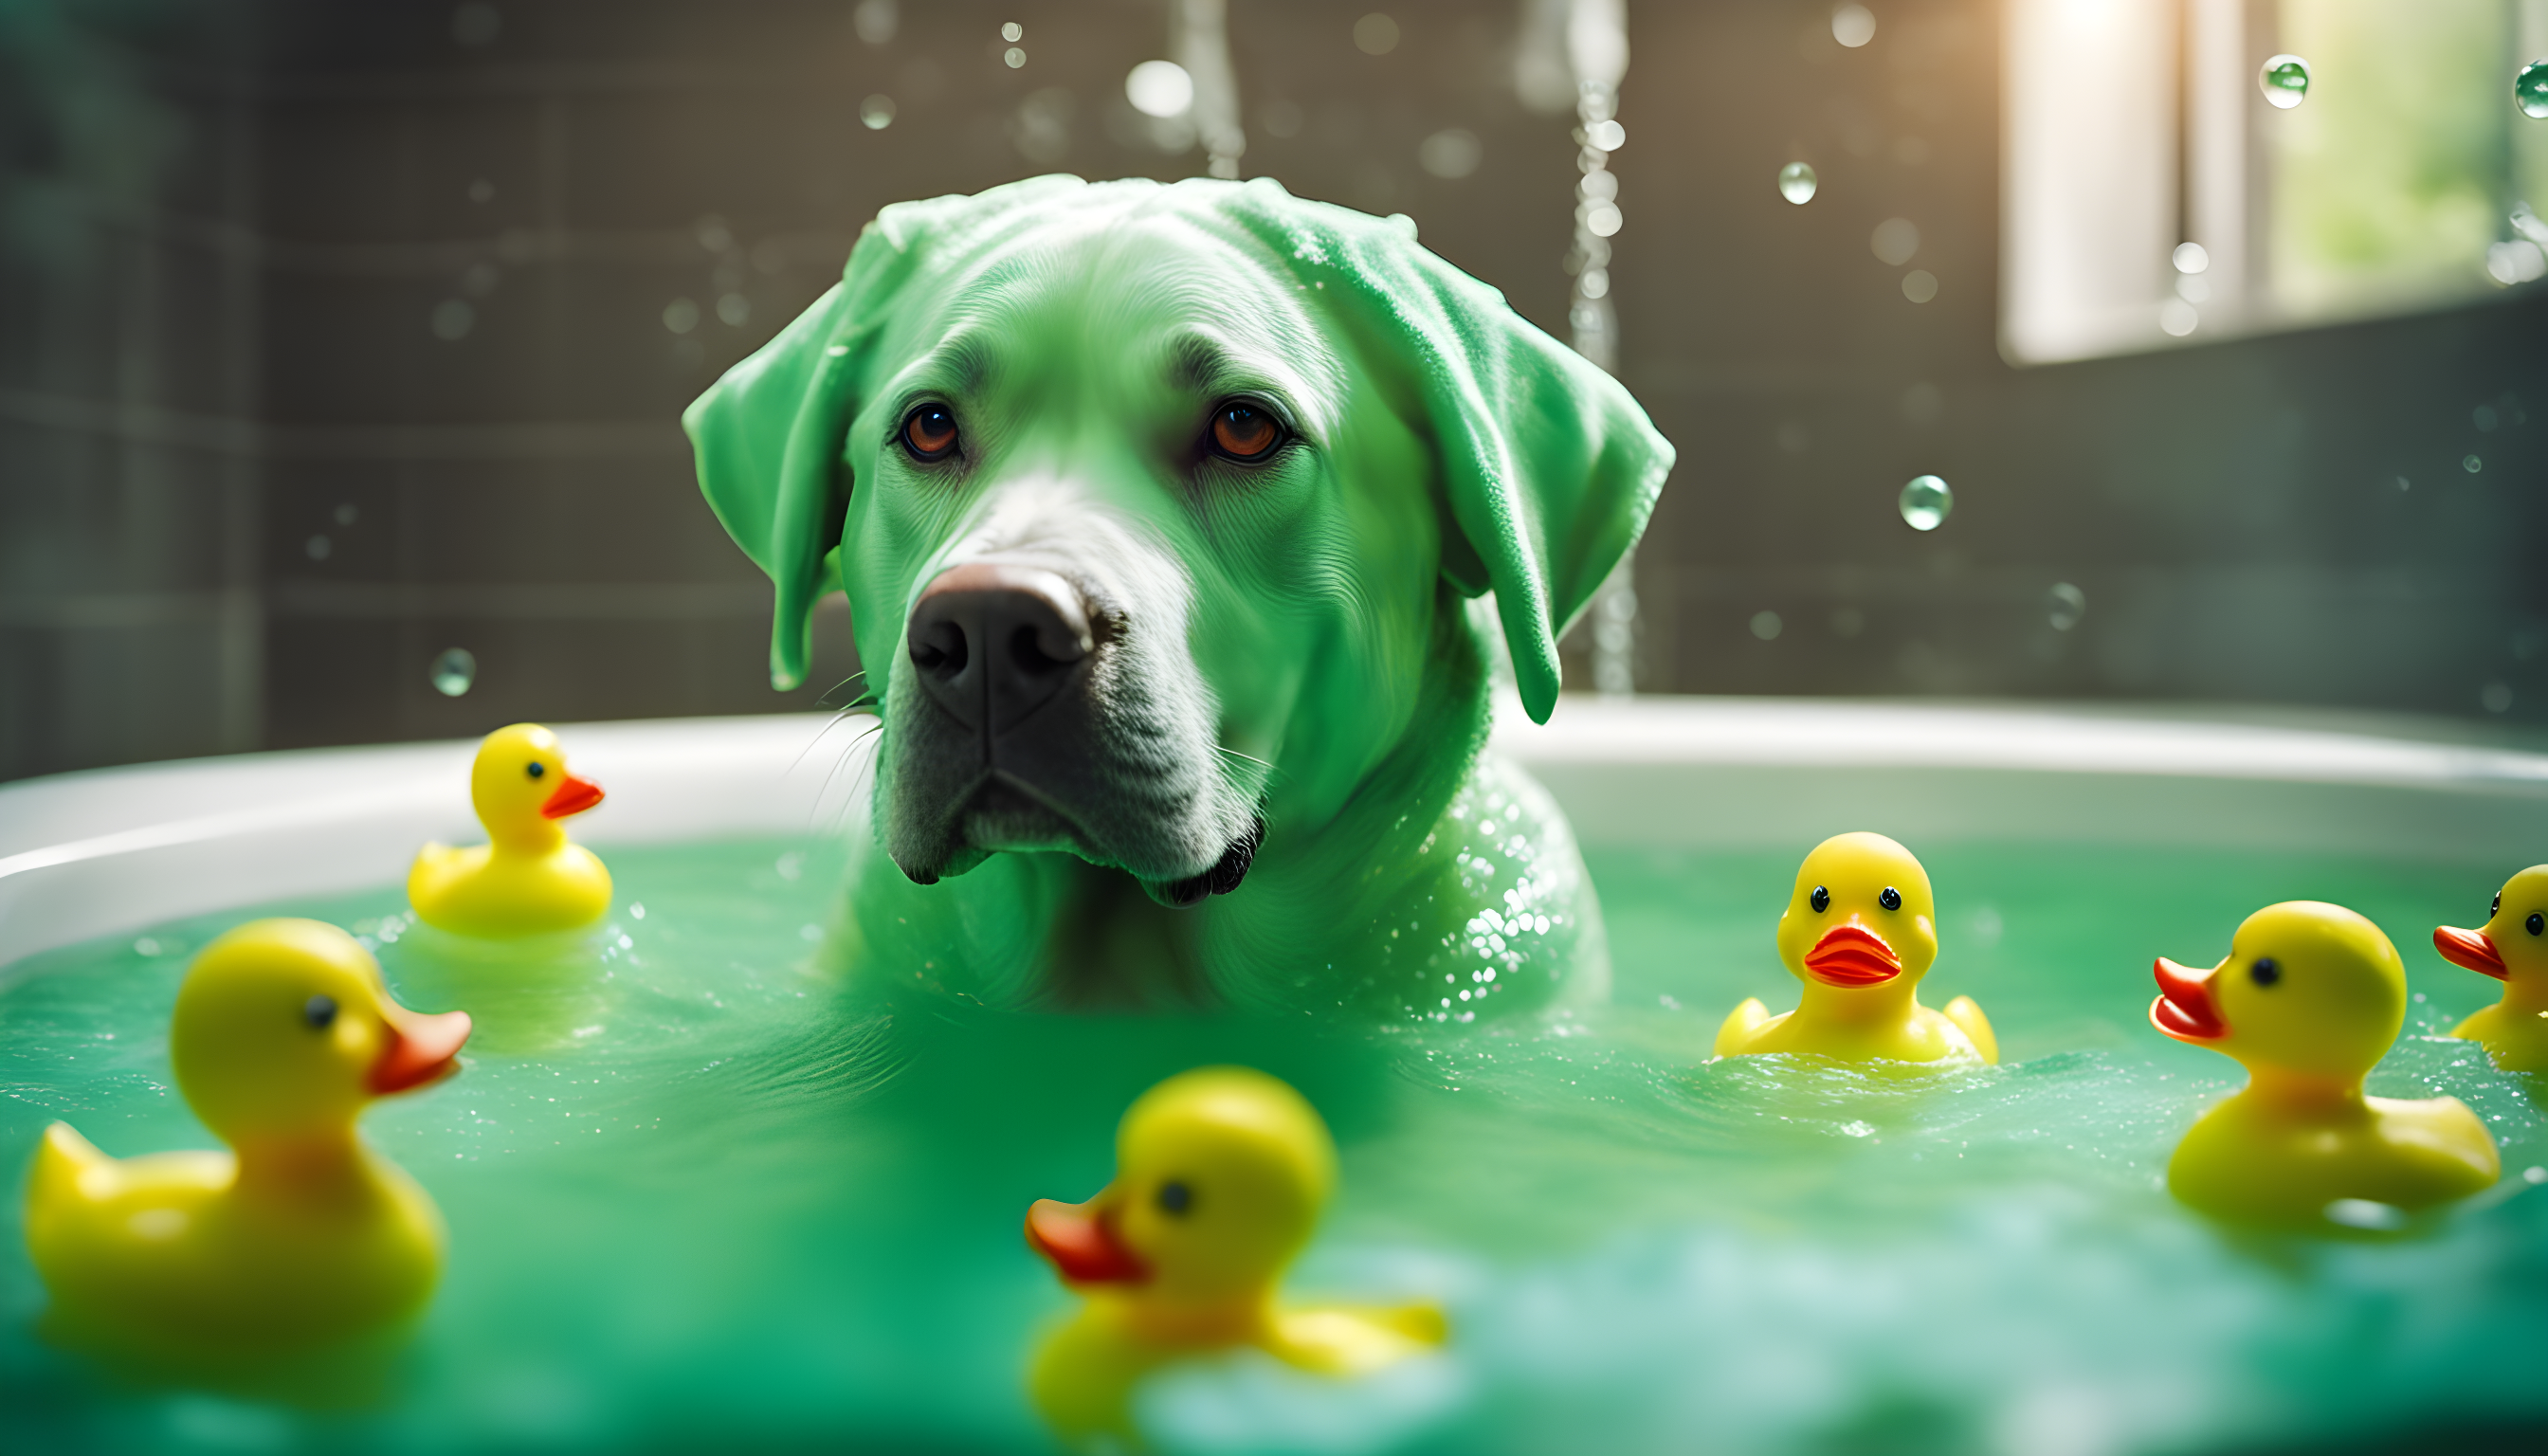 A Green Lab enjoying a bubble bath, complete with rubber duckies and a shower cap.